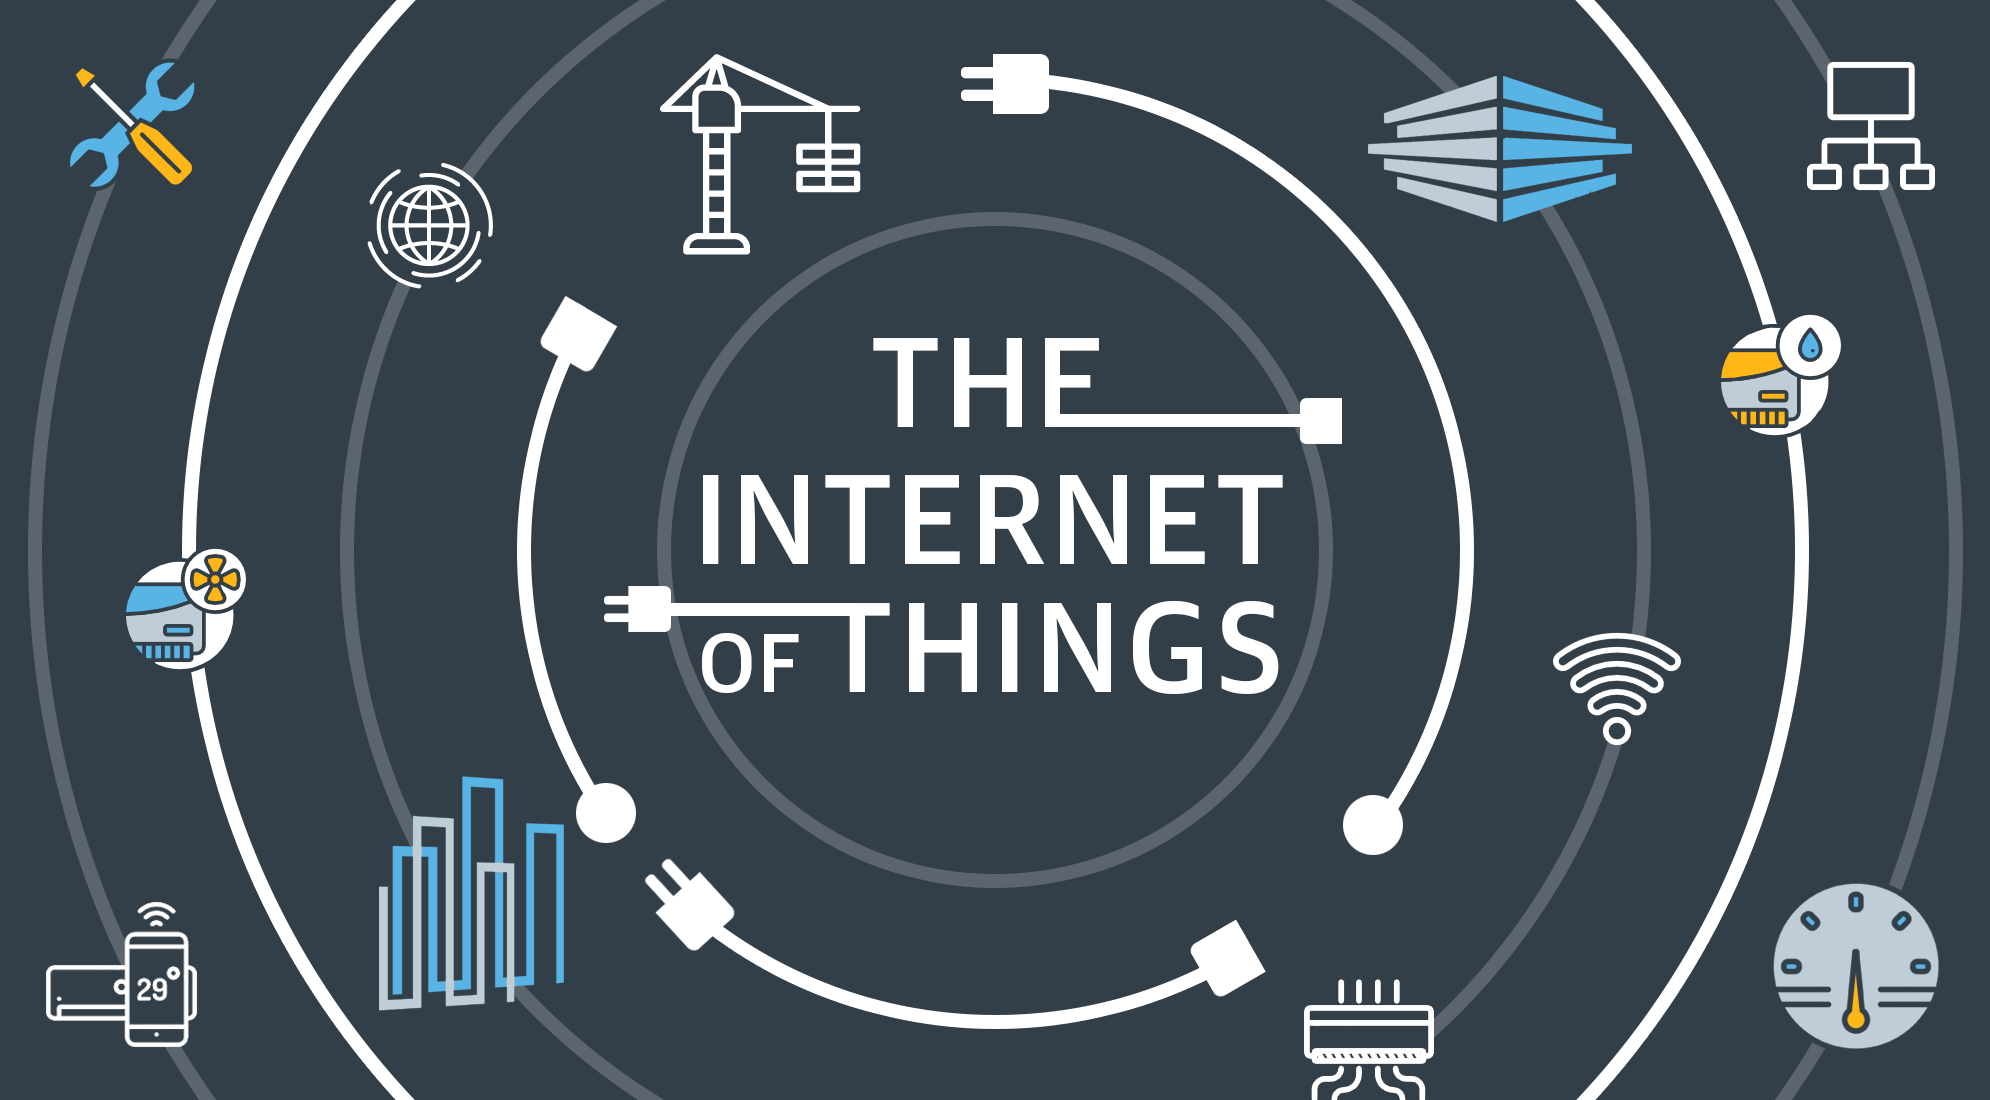 Internet of Things (IoT) Trends & Insights for Construction